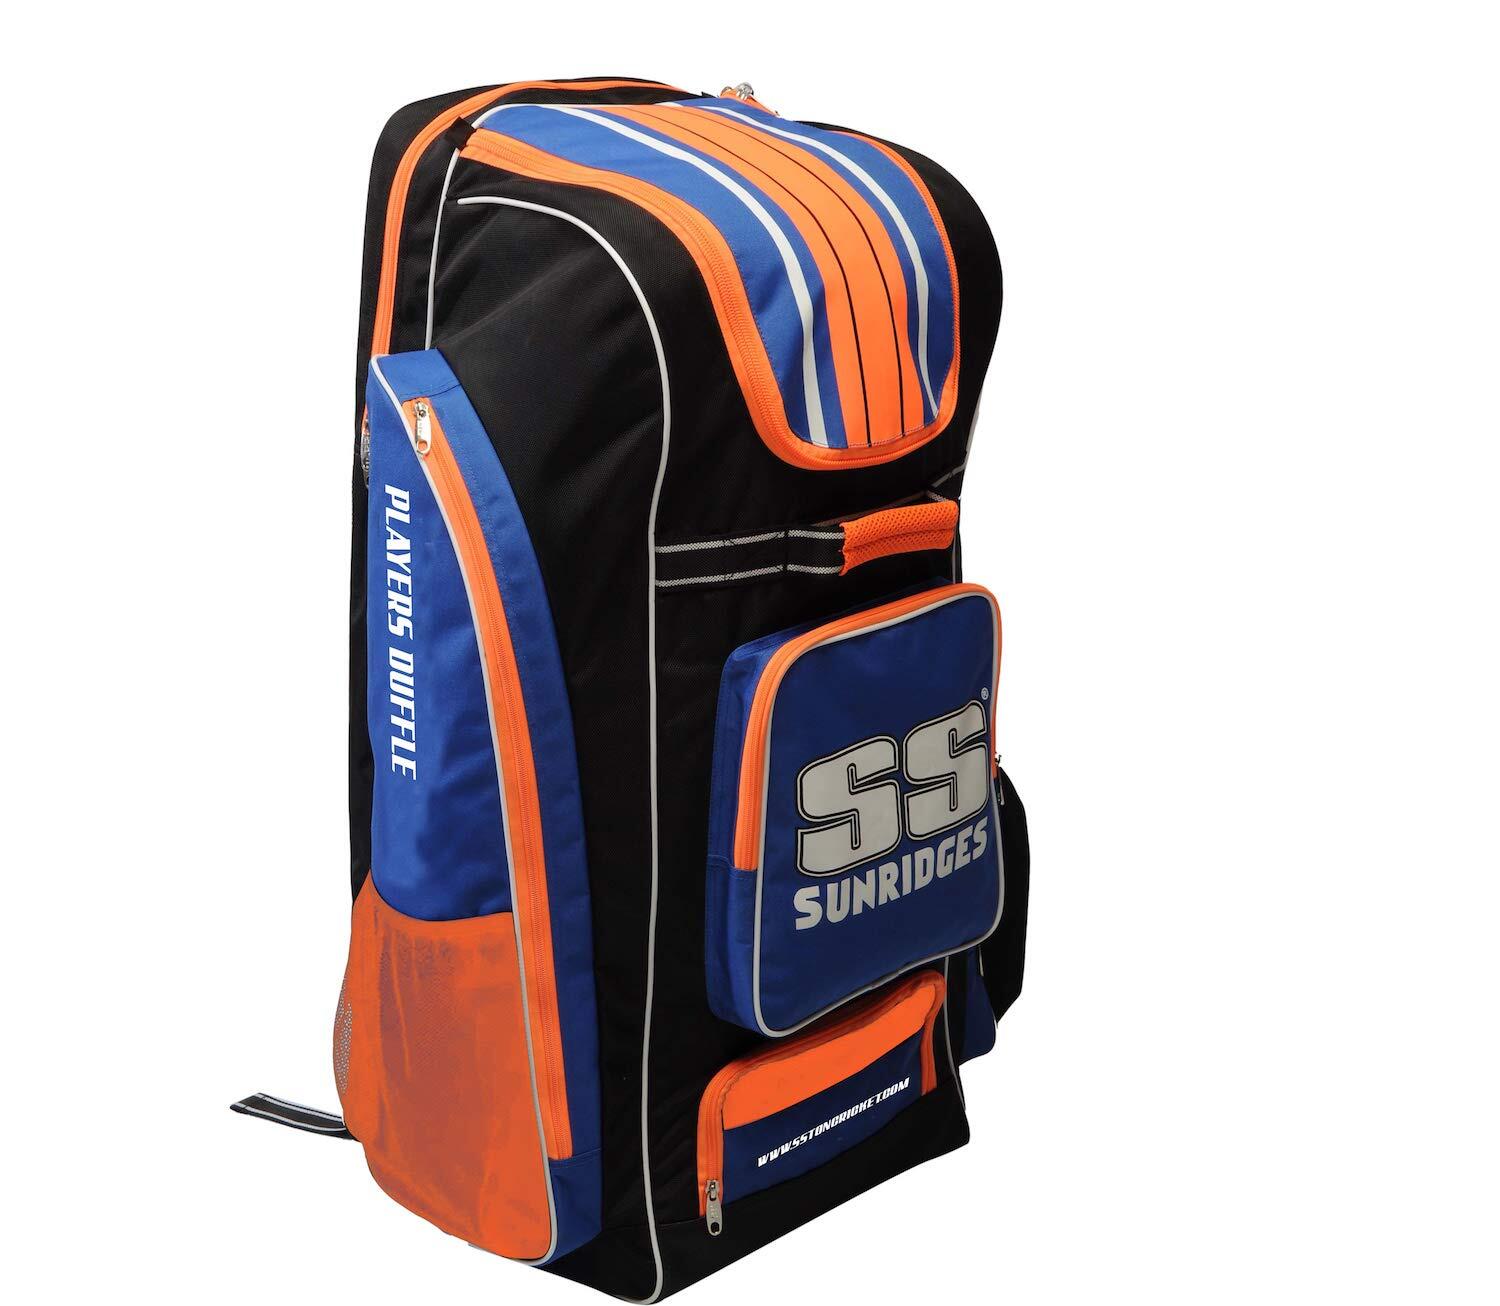 SS TON Ss Bags0069 Kit Bag With Players Duffle And 6 Bat Sleeves